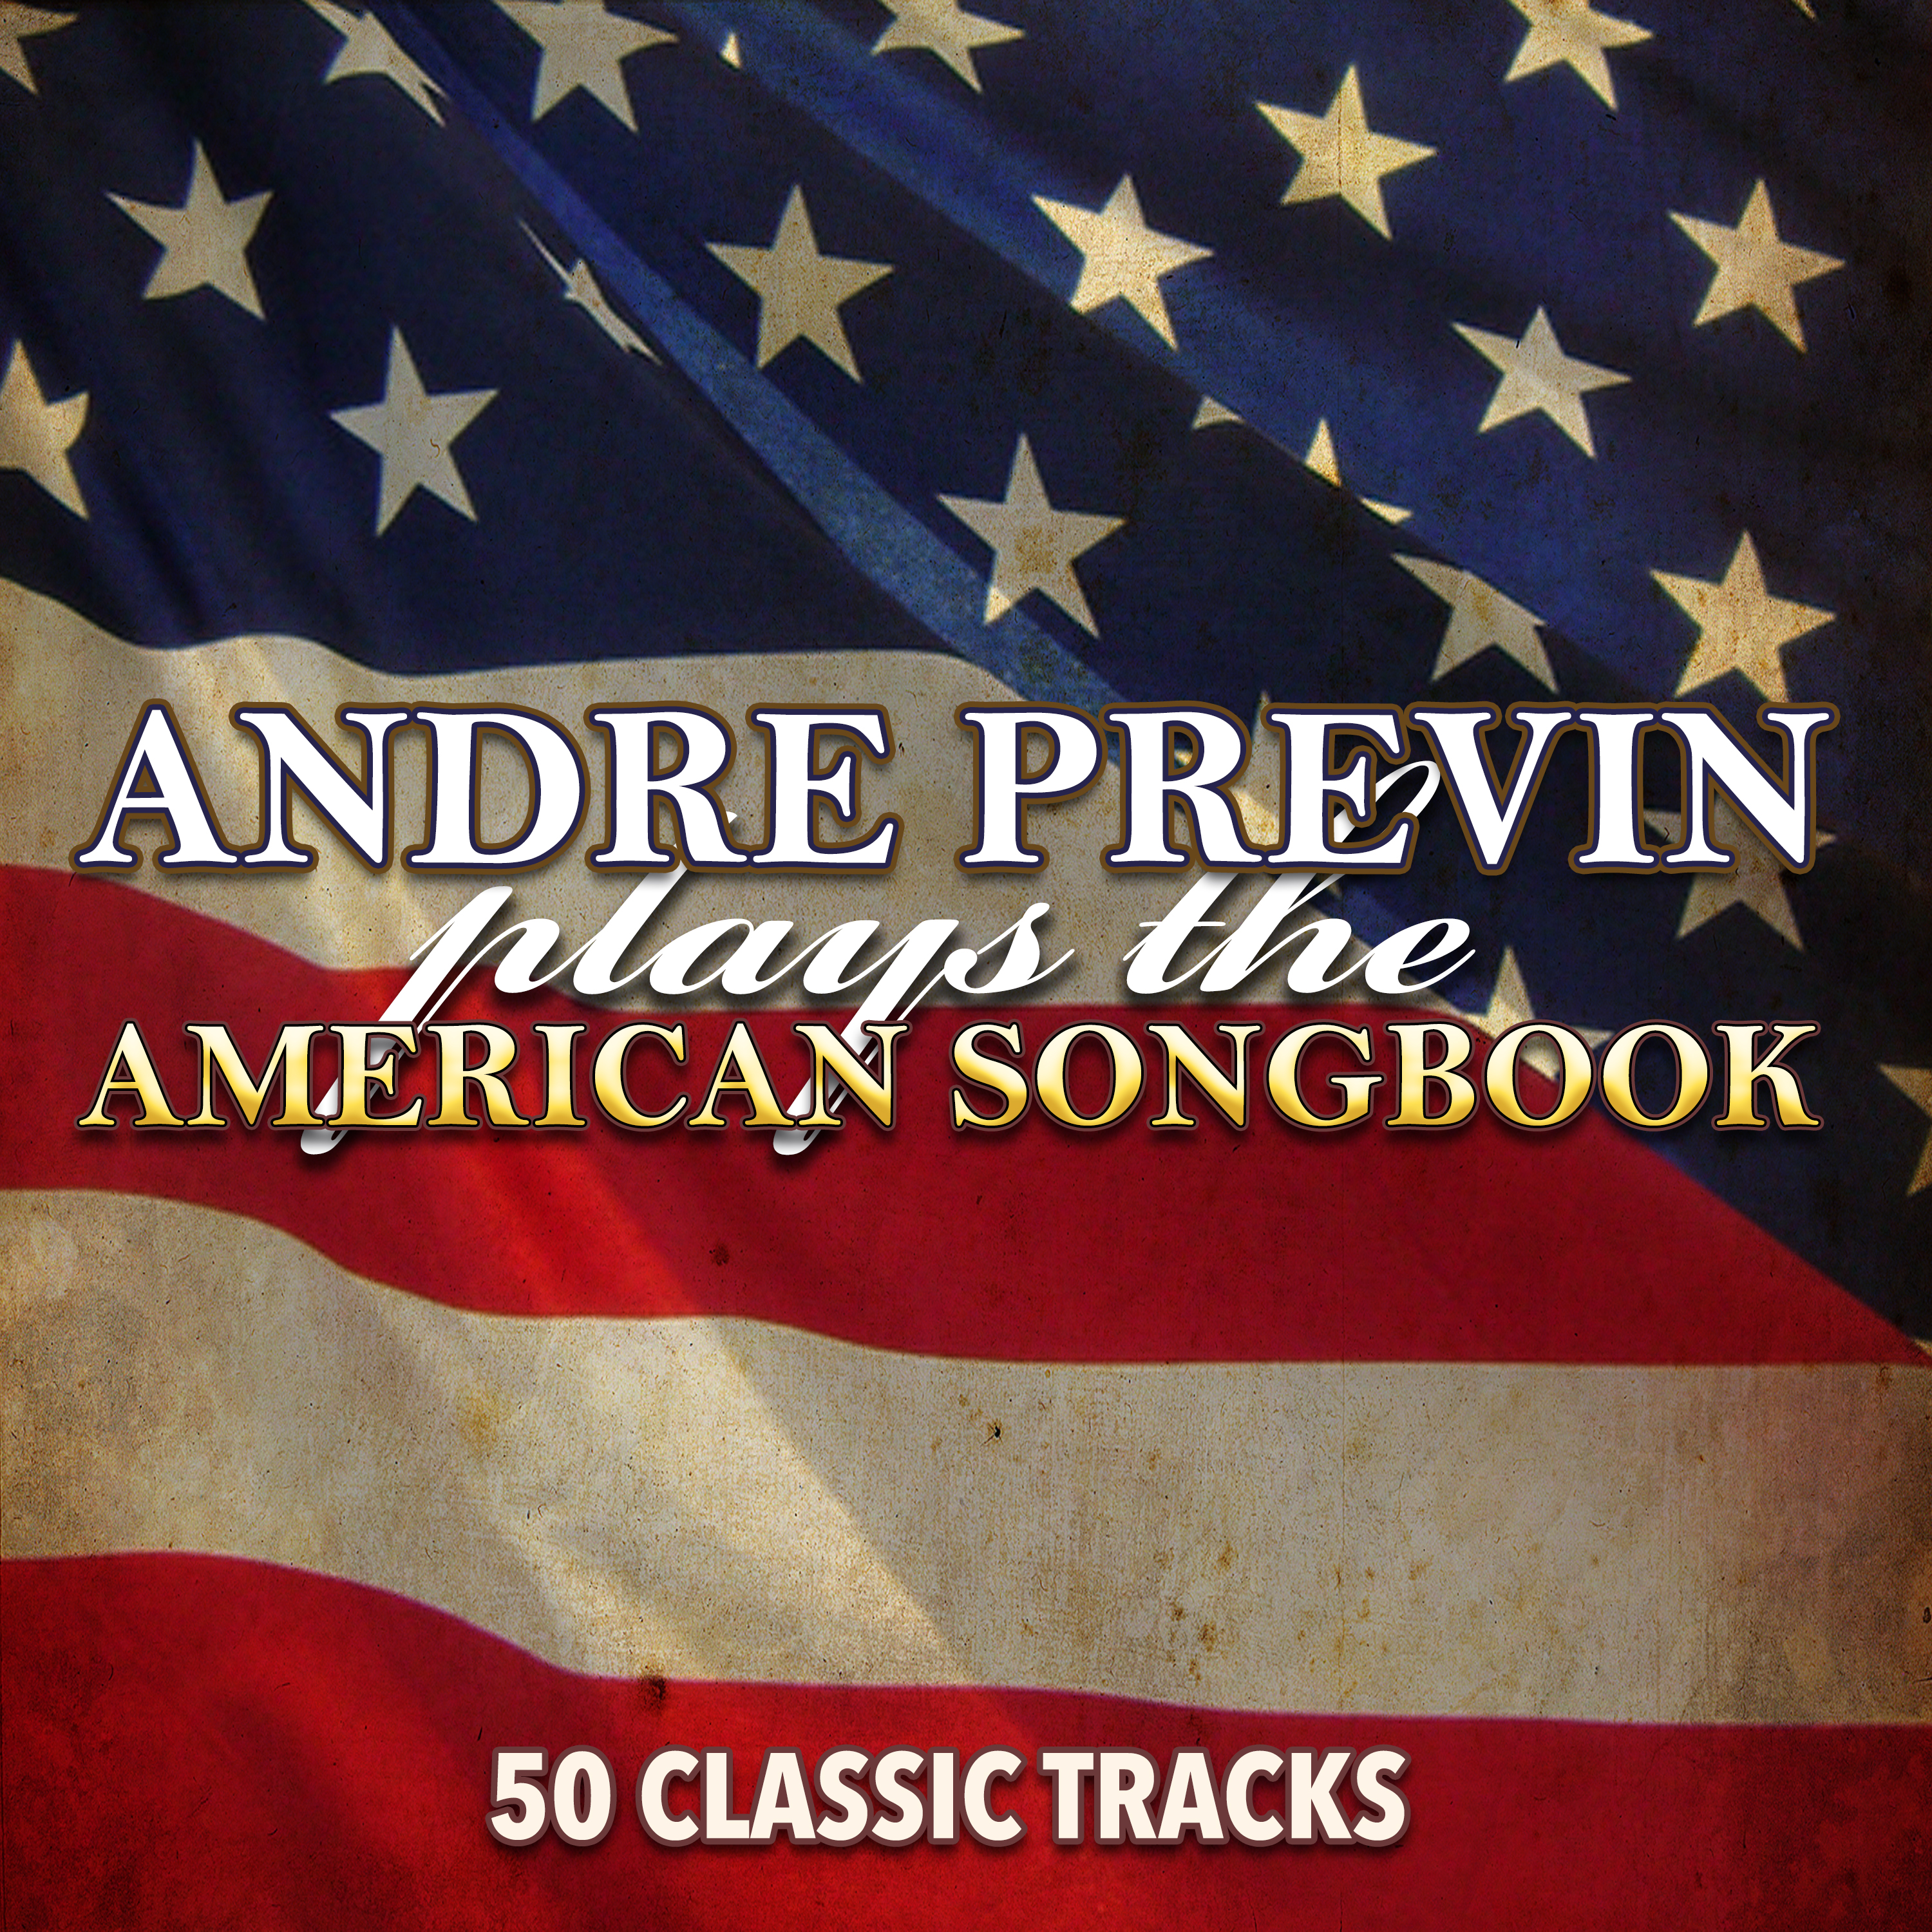 Plays the American Songbook - 50 Classic Tracks